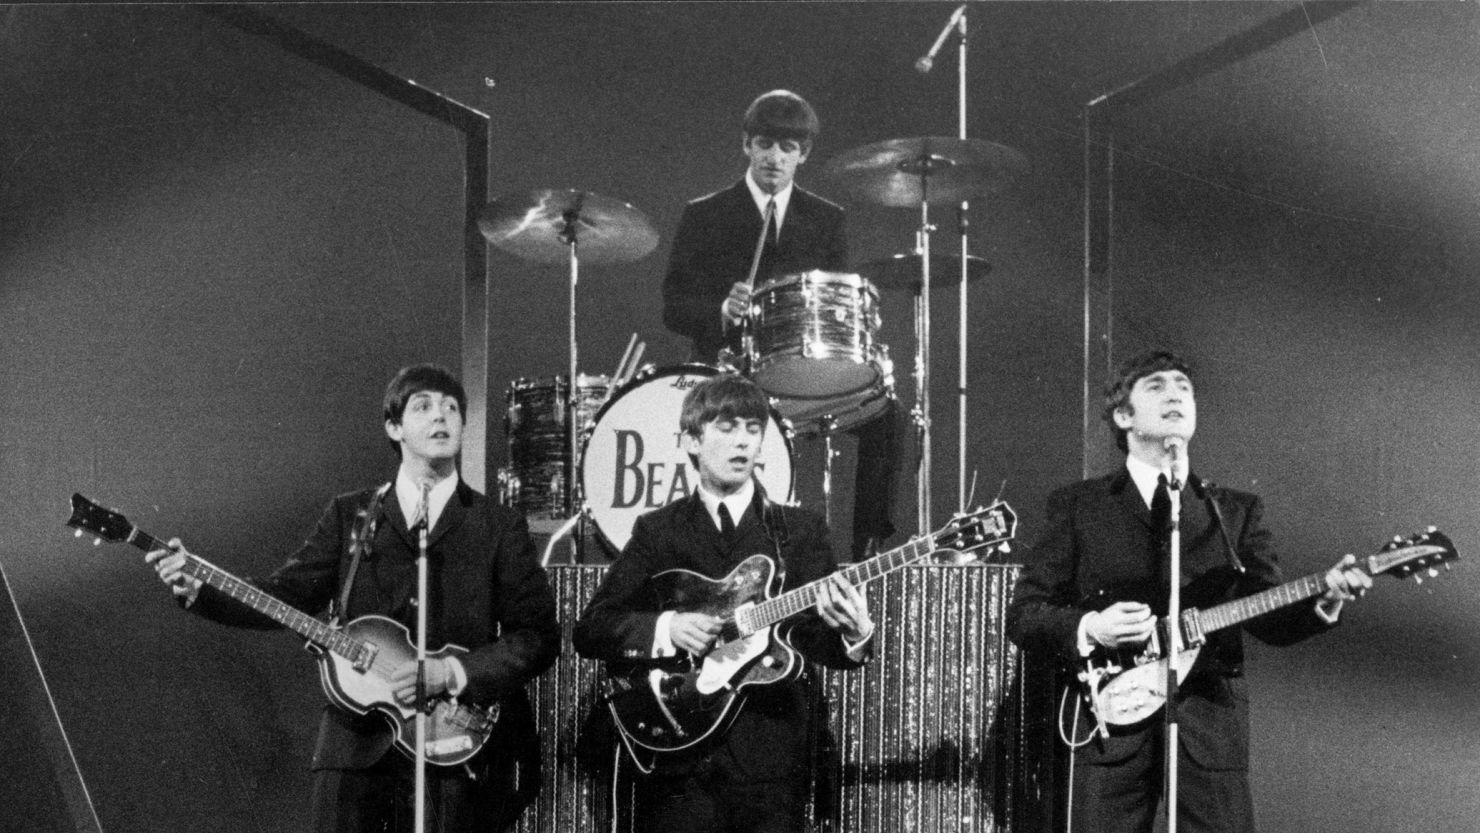 The Beatles' 'Fab Four' members each have a Sam Mendes biopic in the works